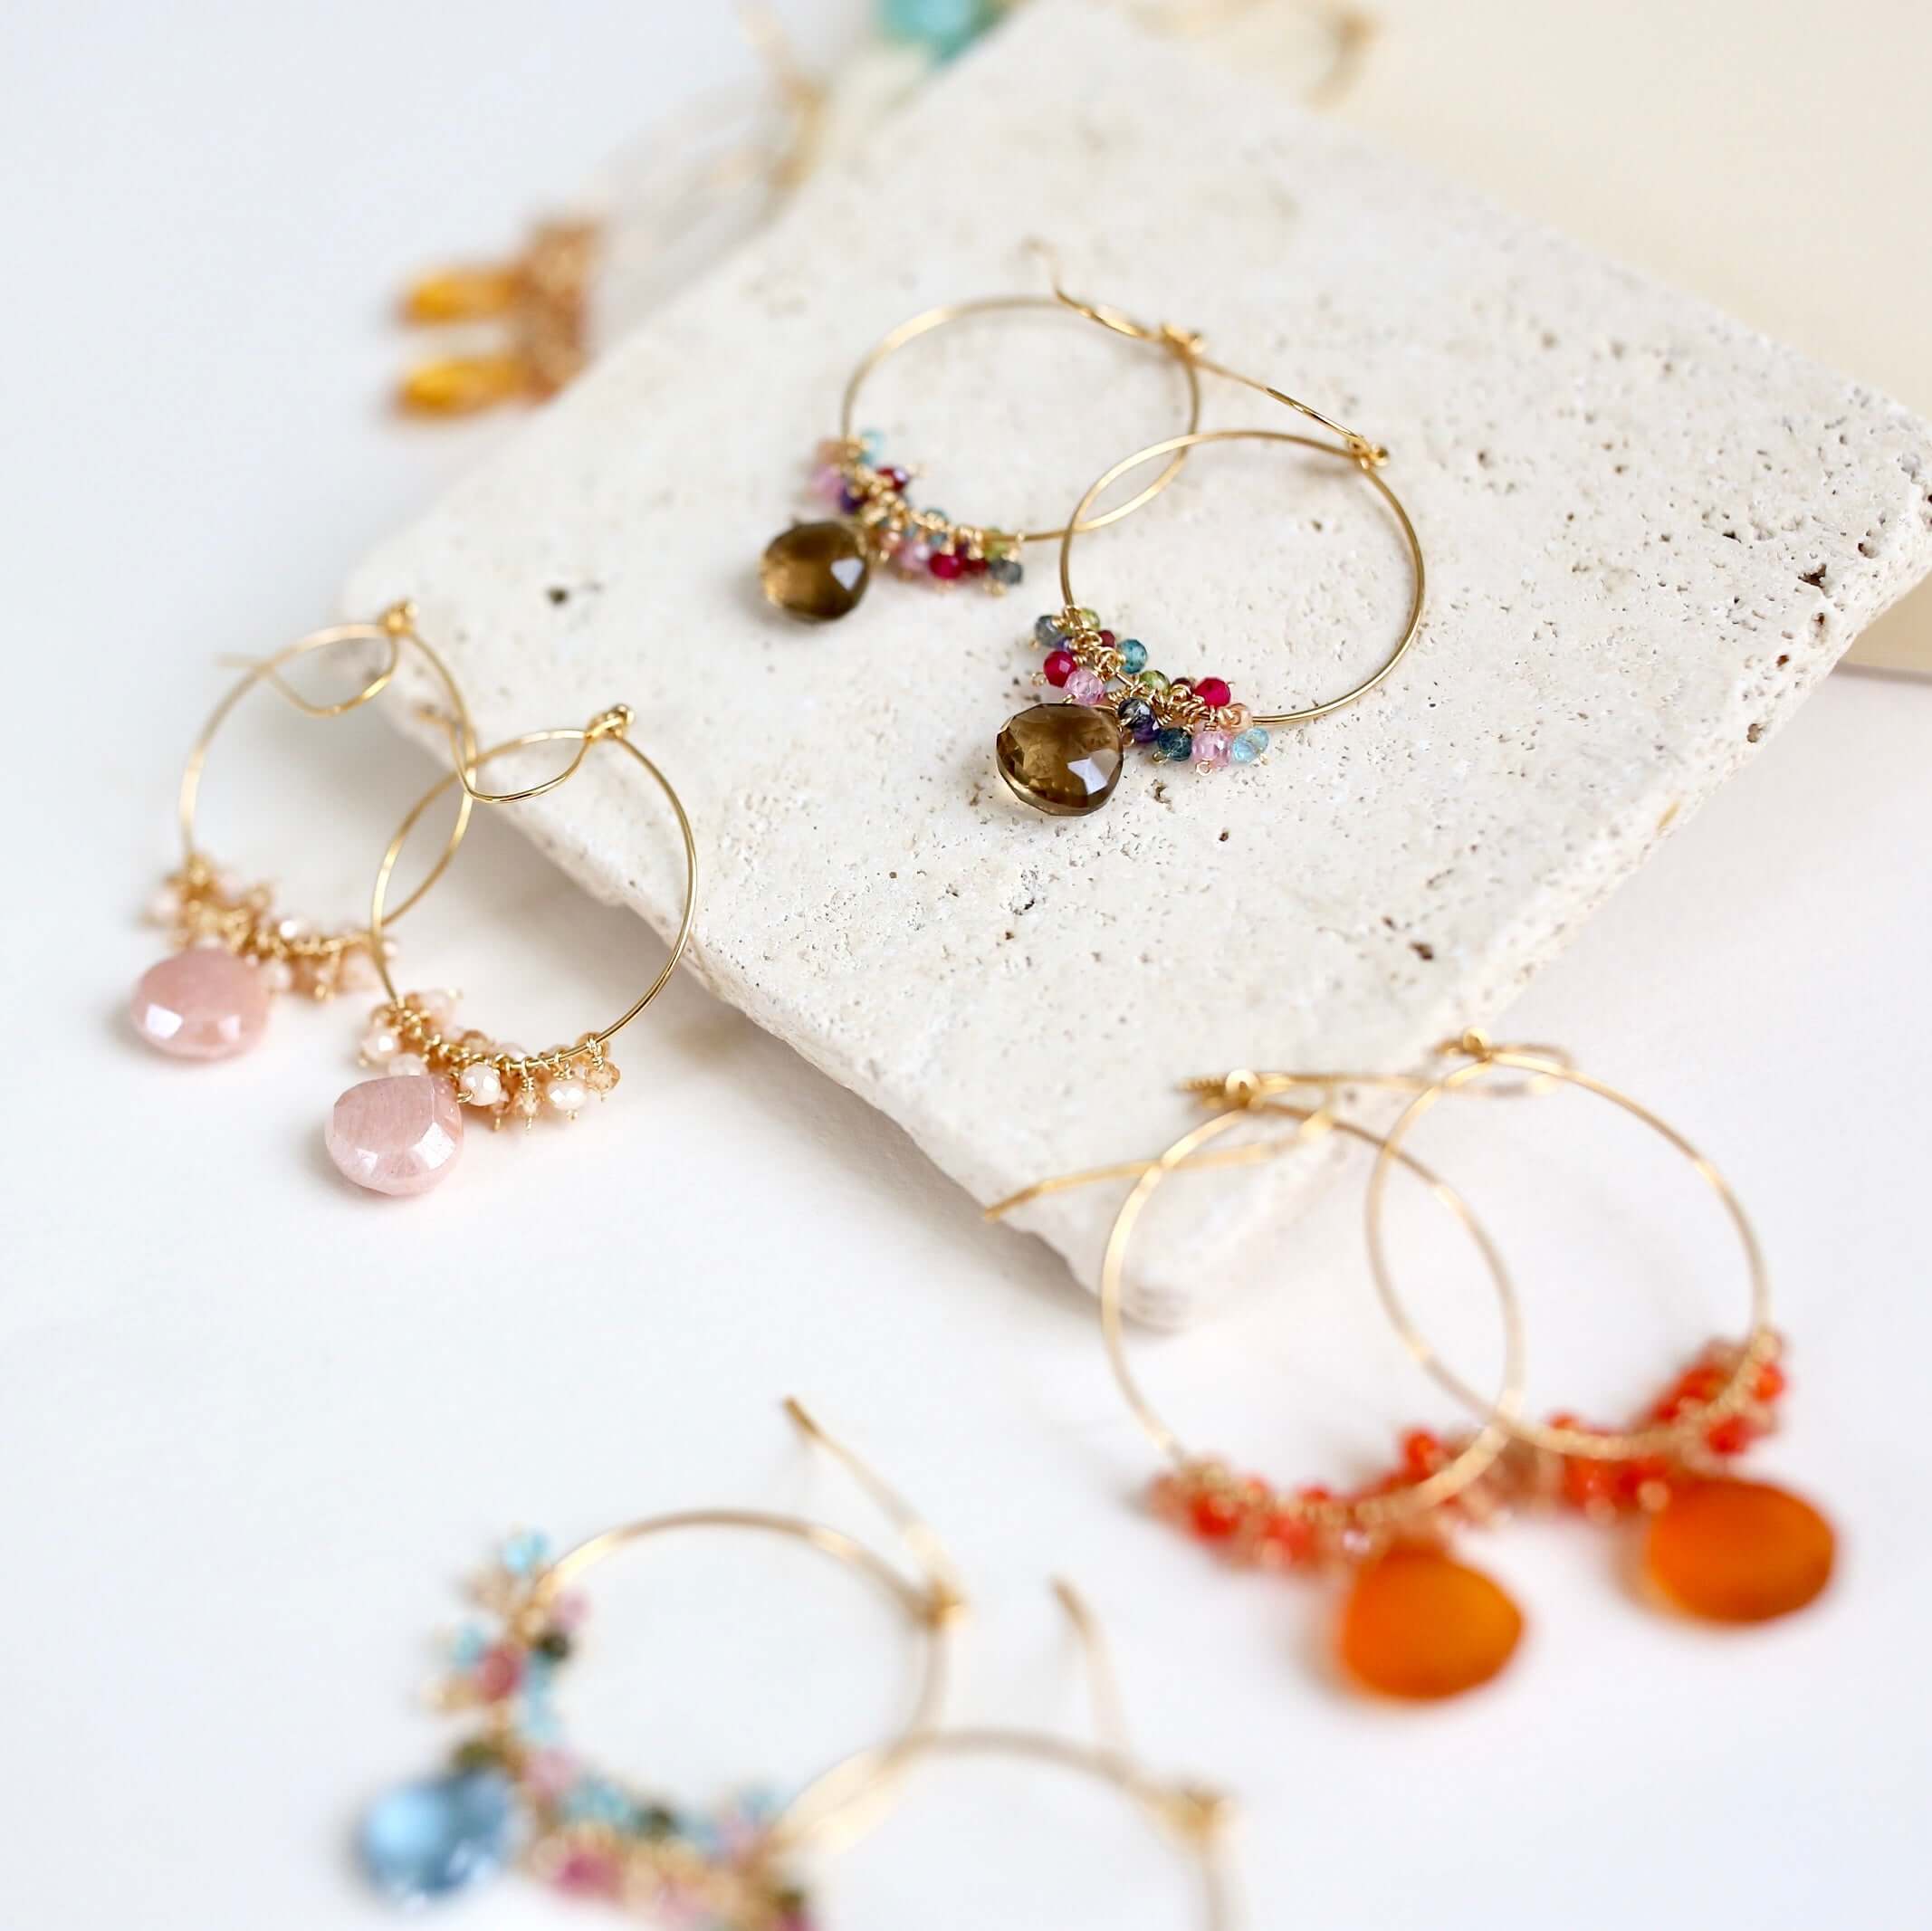 Swing Earrings featuring Colorful gemstones and French hooks for a touch of effortless elegance